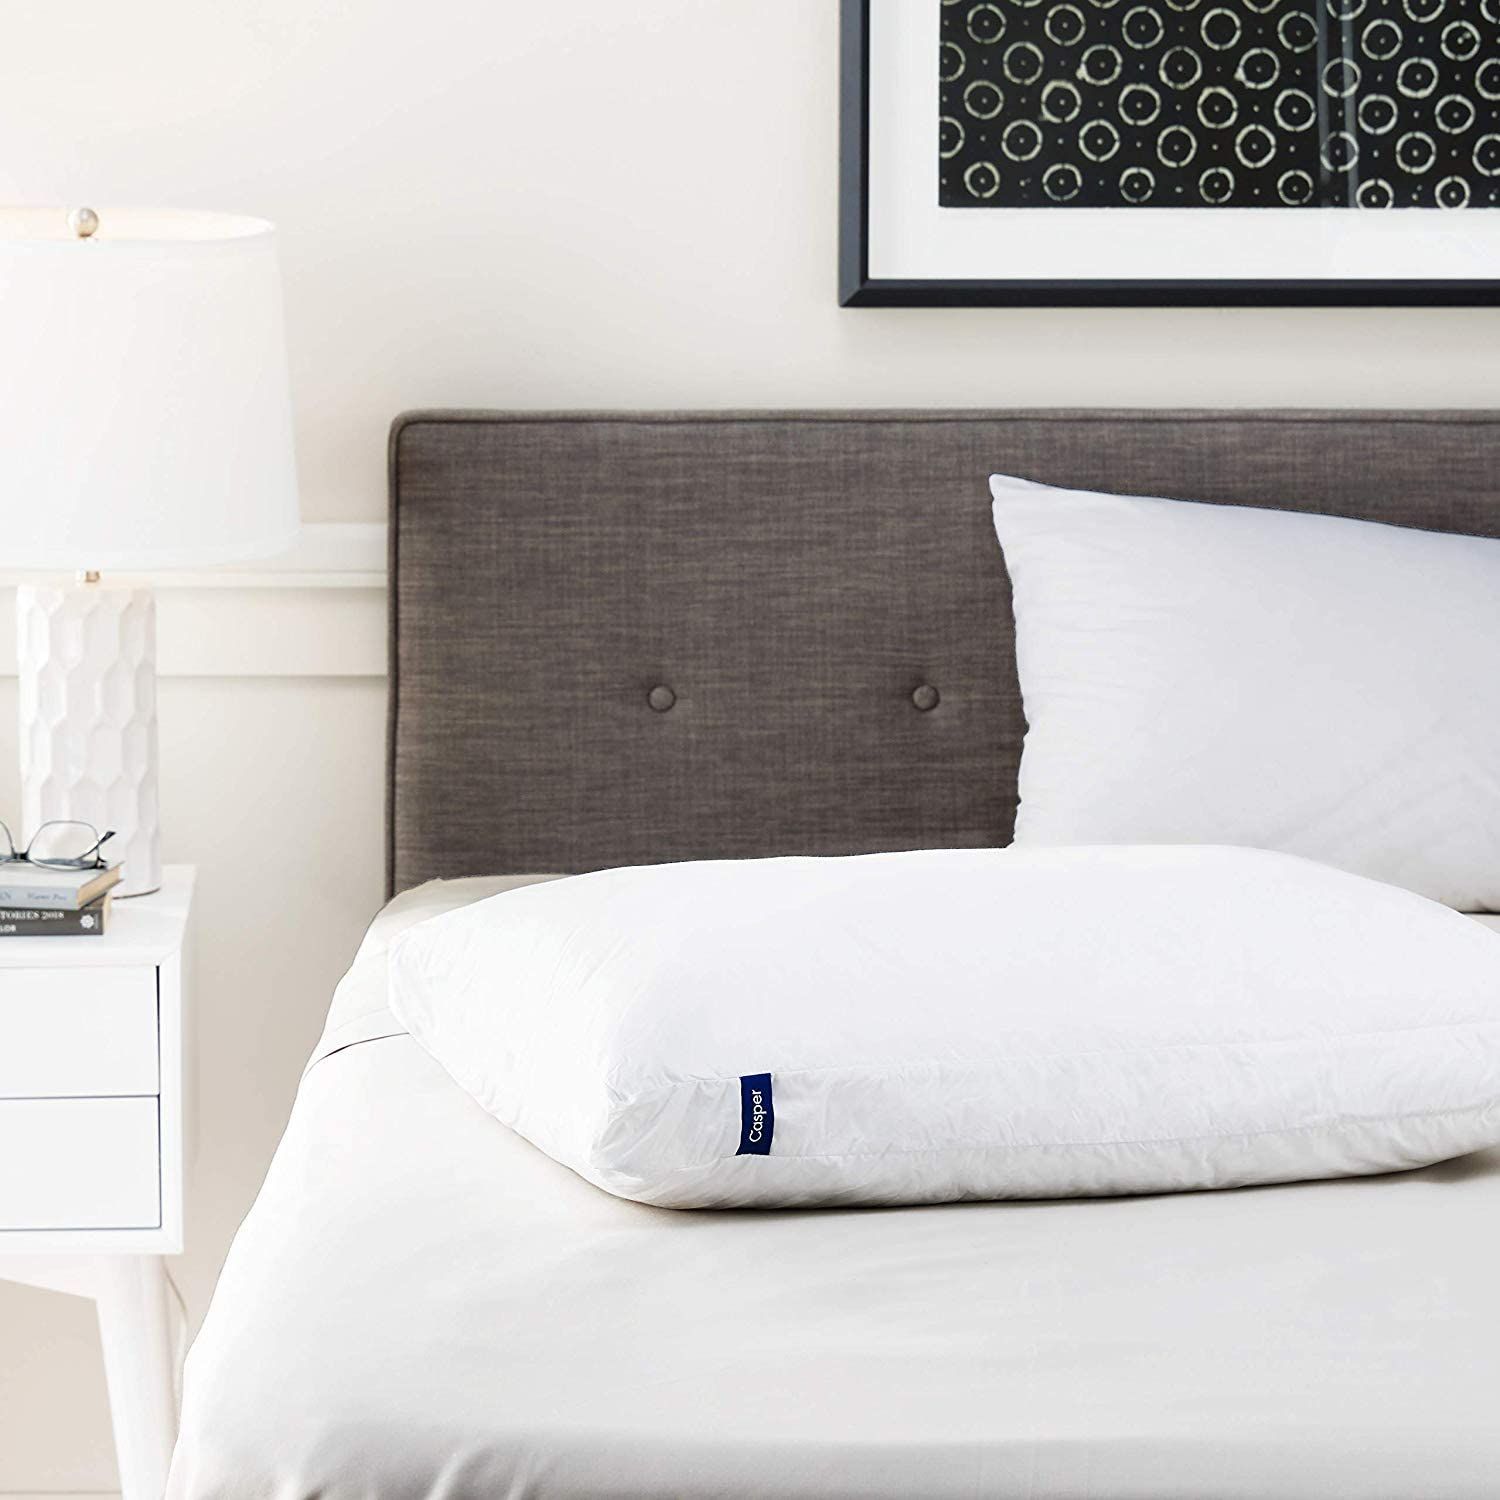 where to buy flat pillows